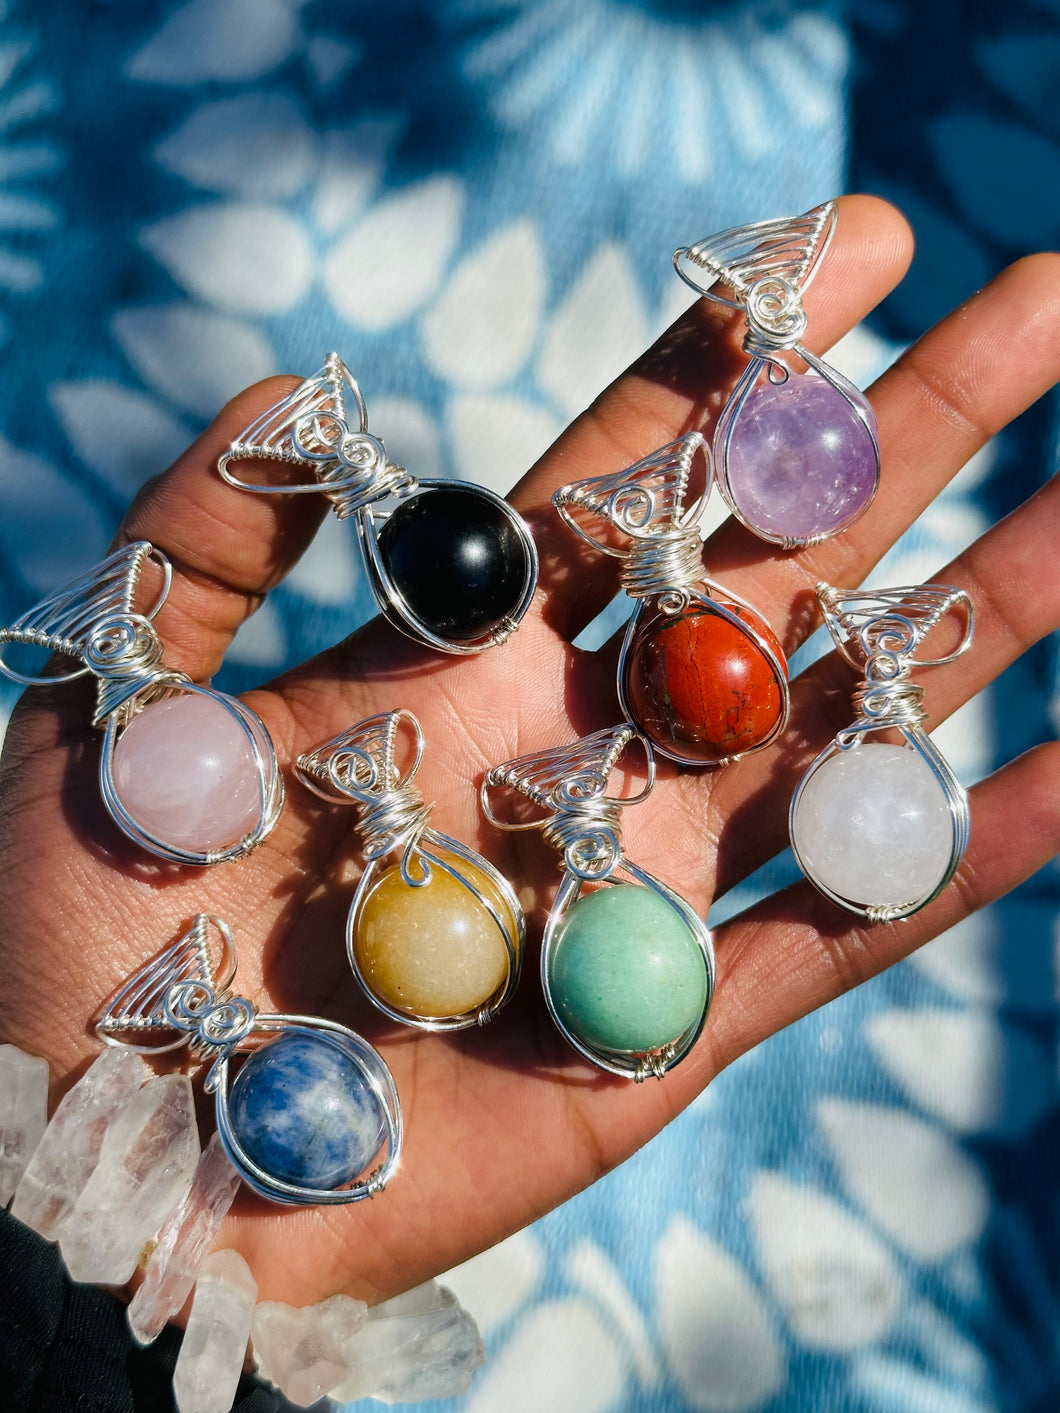 Crystal Ball necklaces